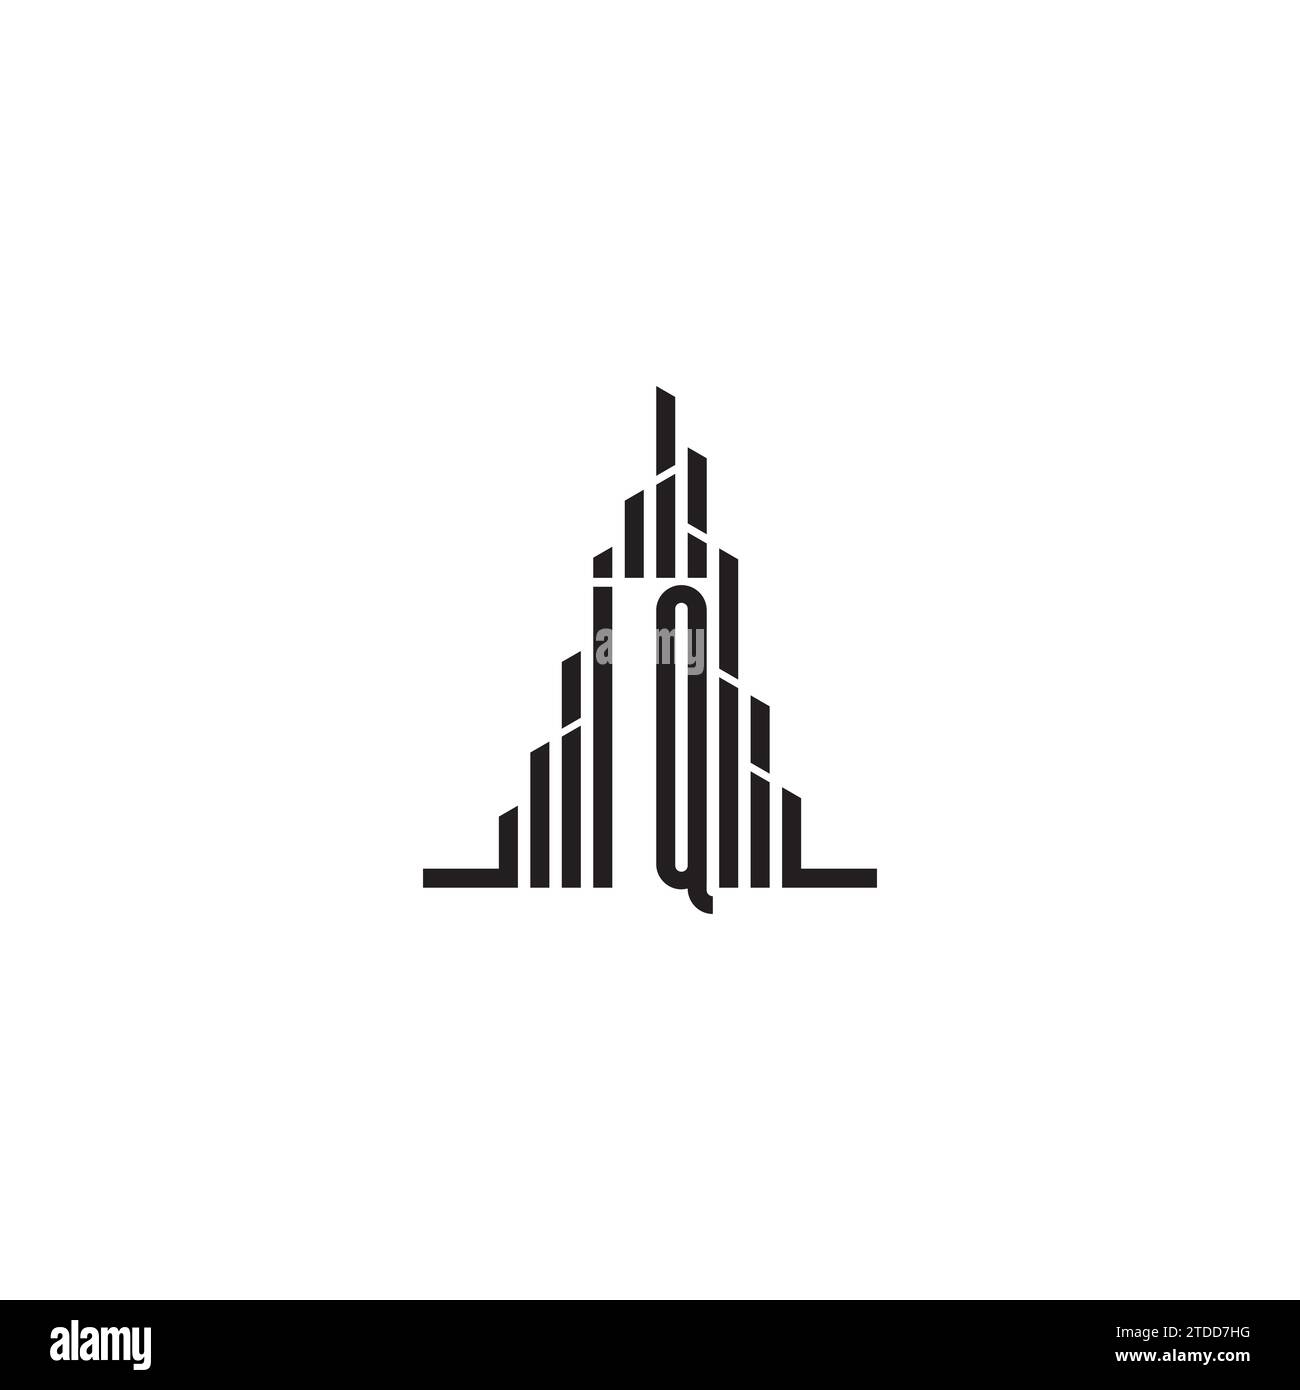 IQ skyscraper initial logo concept in high quality professional design that will print well across any print media Stock Vector